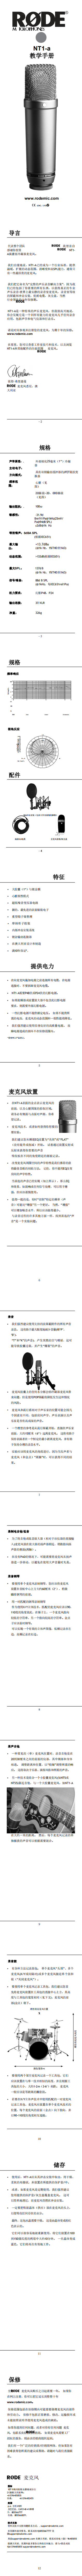 NT1-A_product_manual_1_12_translate_Chinese_0.png